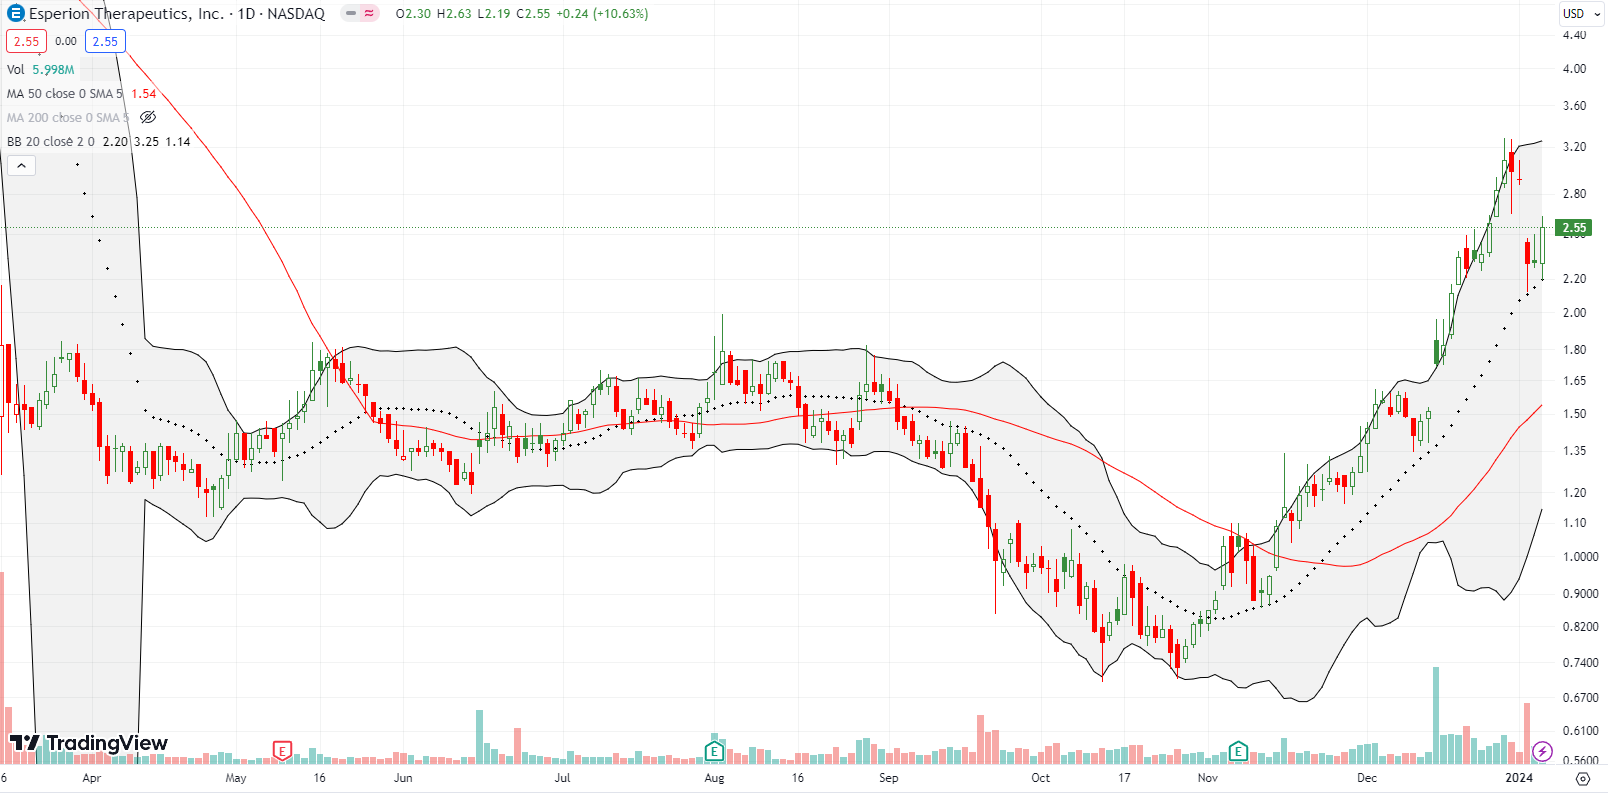 Esperion Therapeutics Inc (ESPR) stopped hugging its upper Bollinger Band after a plunge tested 20DMA support on news of a settlement with Daiichi Sankyo.